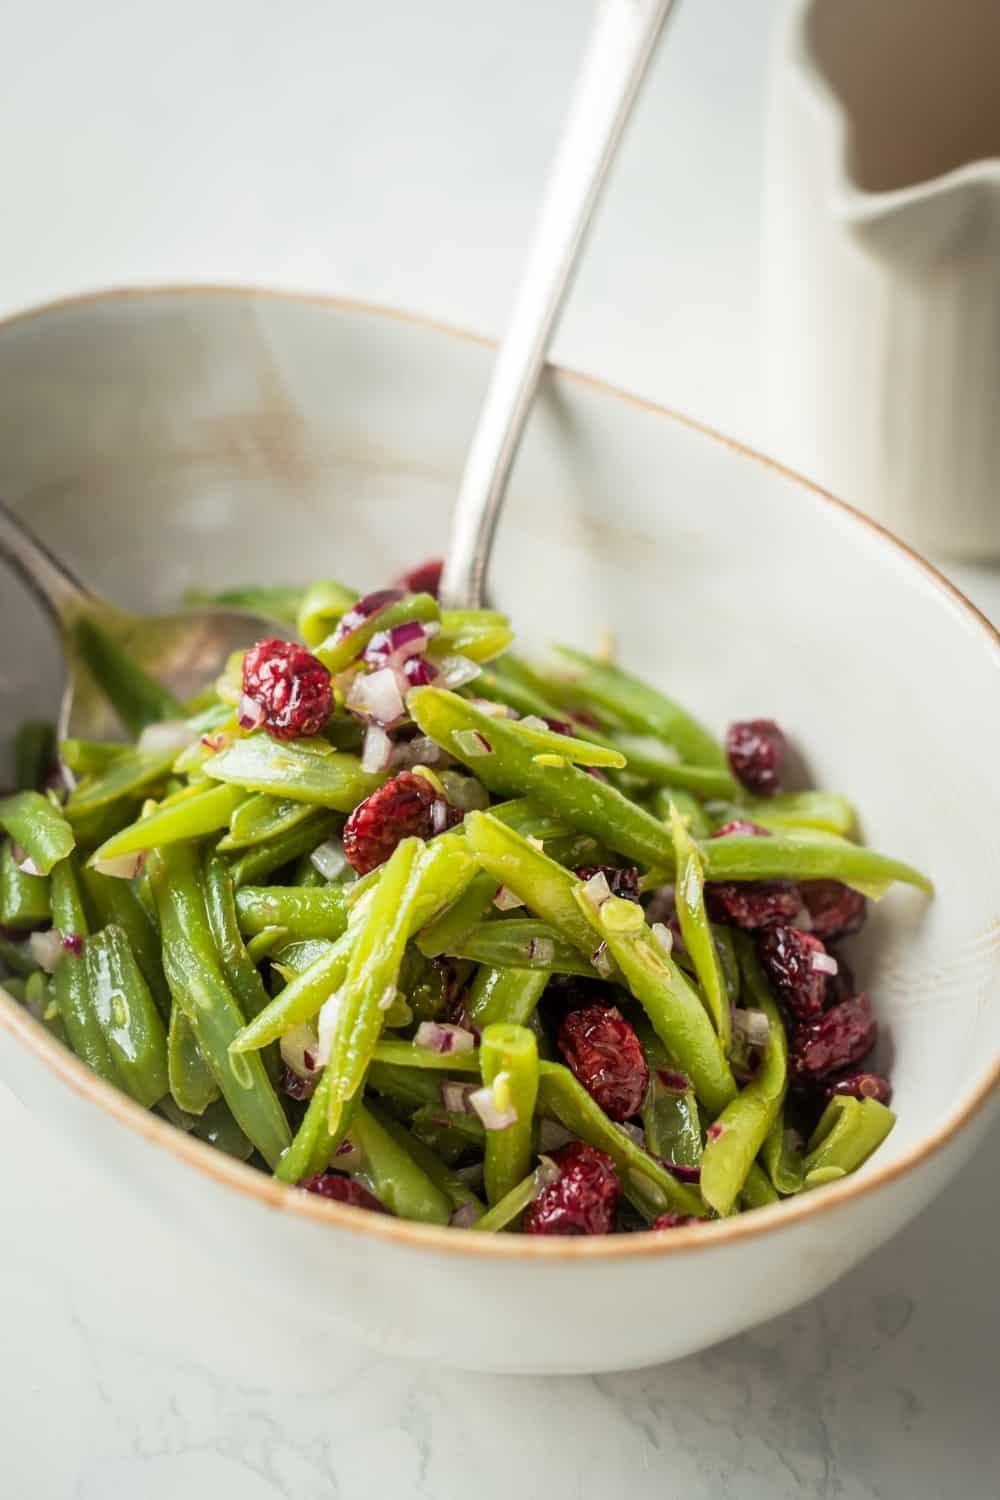 A white dish with green beans, red onion, and cranberries on top. There are two spoons in the green beans.